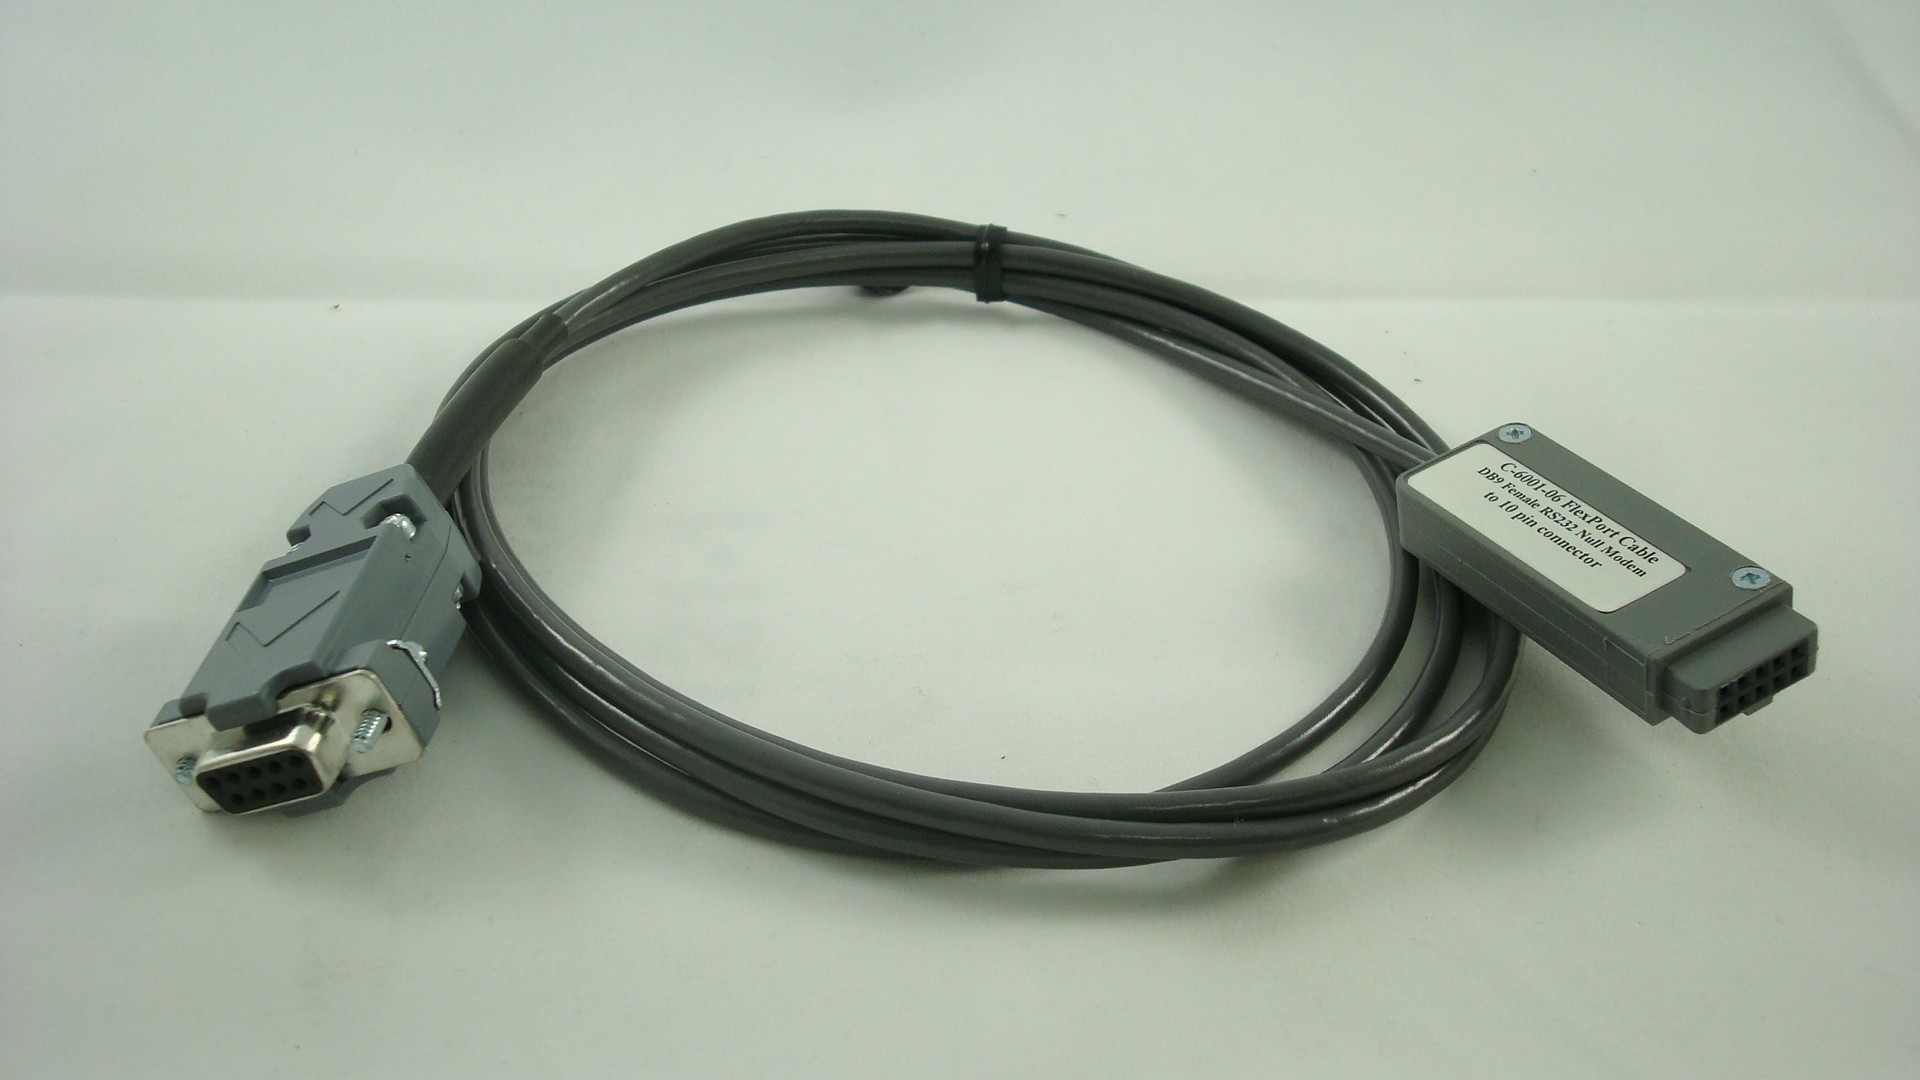 C-6001-06 RS232 DB9 Female Null Modem to 10 pin connector (6 ft)